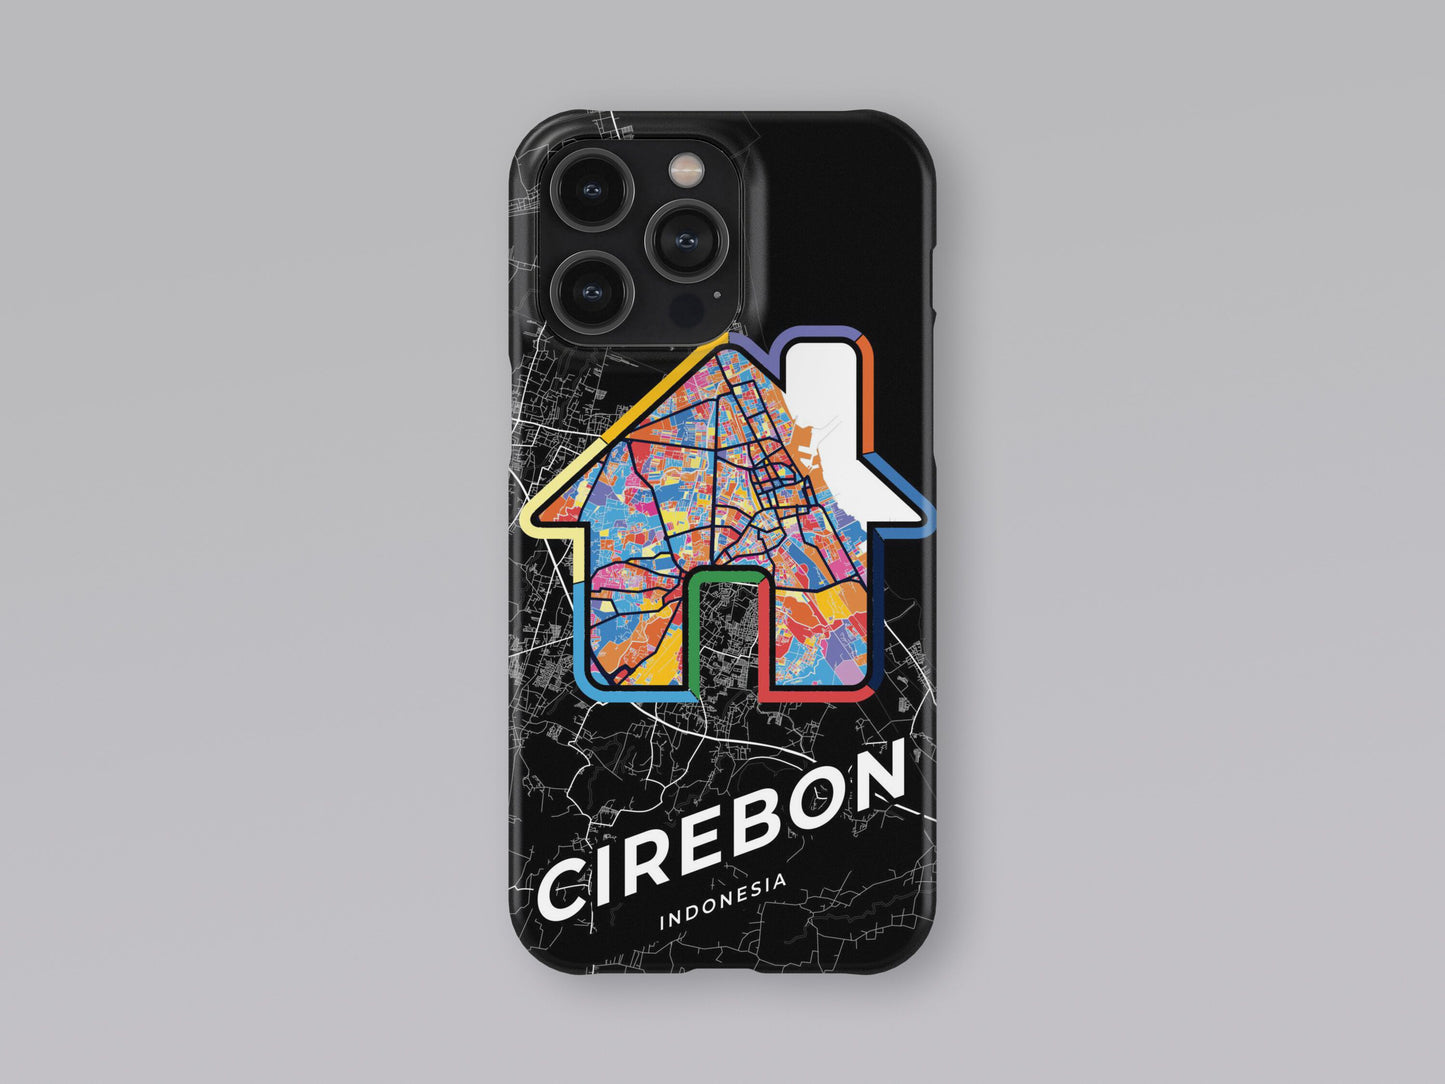 Cirebon Indonesia slim phone case with colorful icon. Birthday, wedding or housewarming gift. Couple match cases. 3